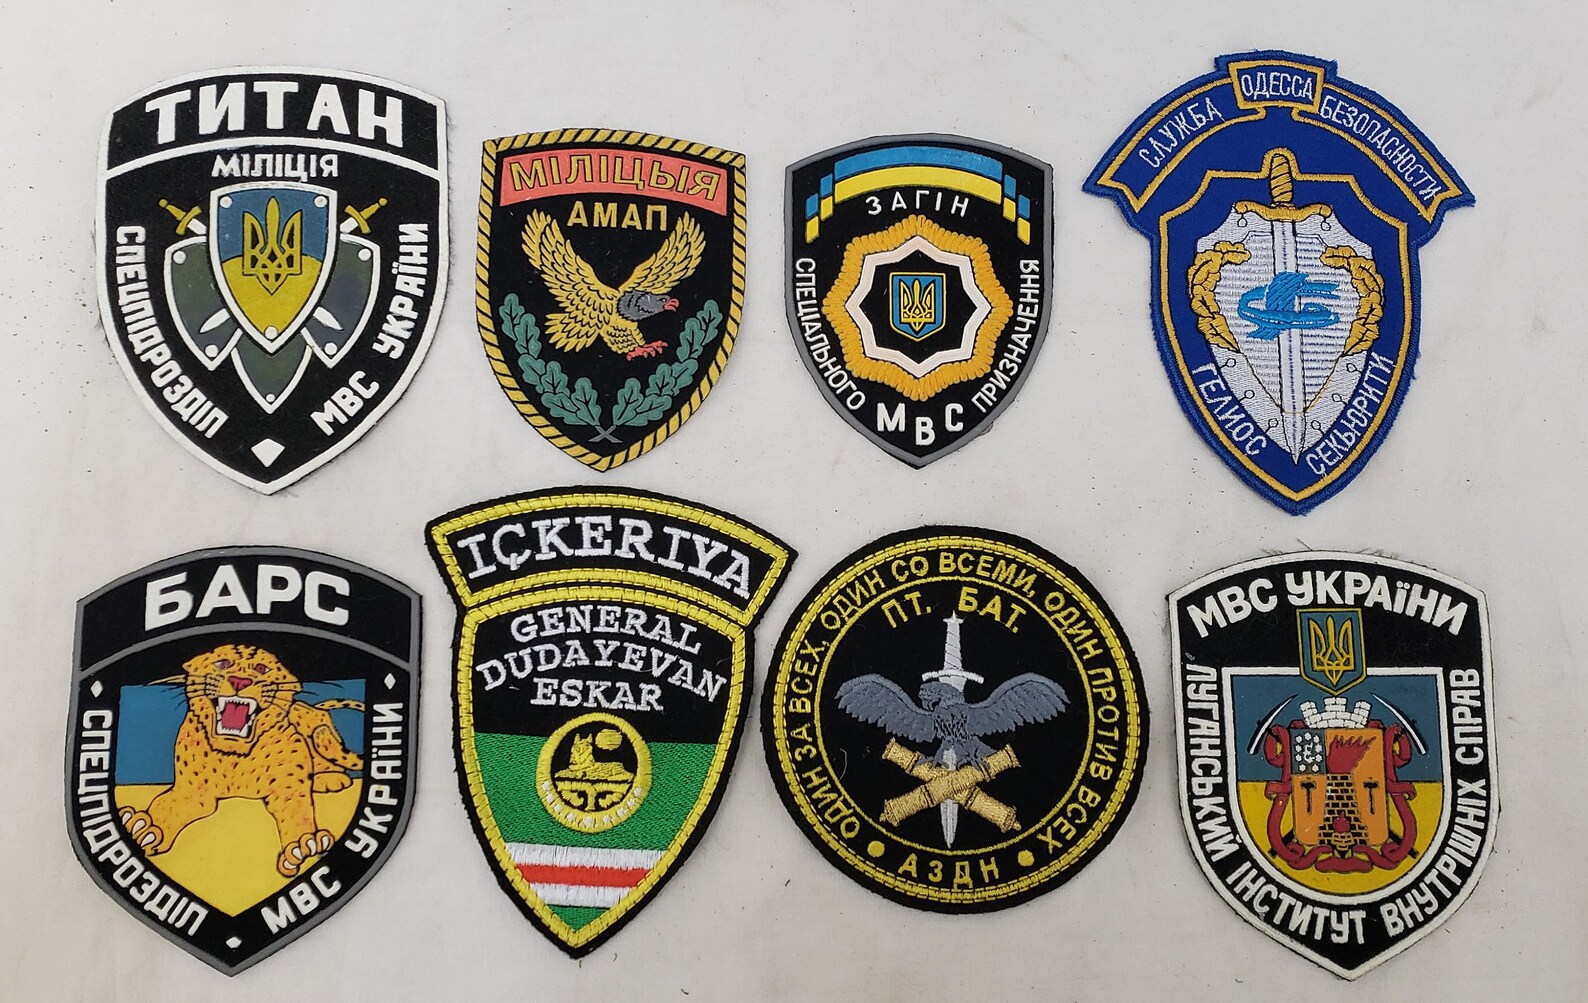 Vintage Russian Military Patch Set Etsy